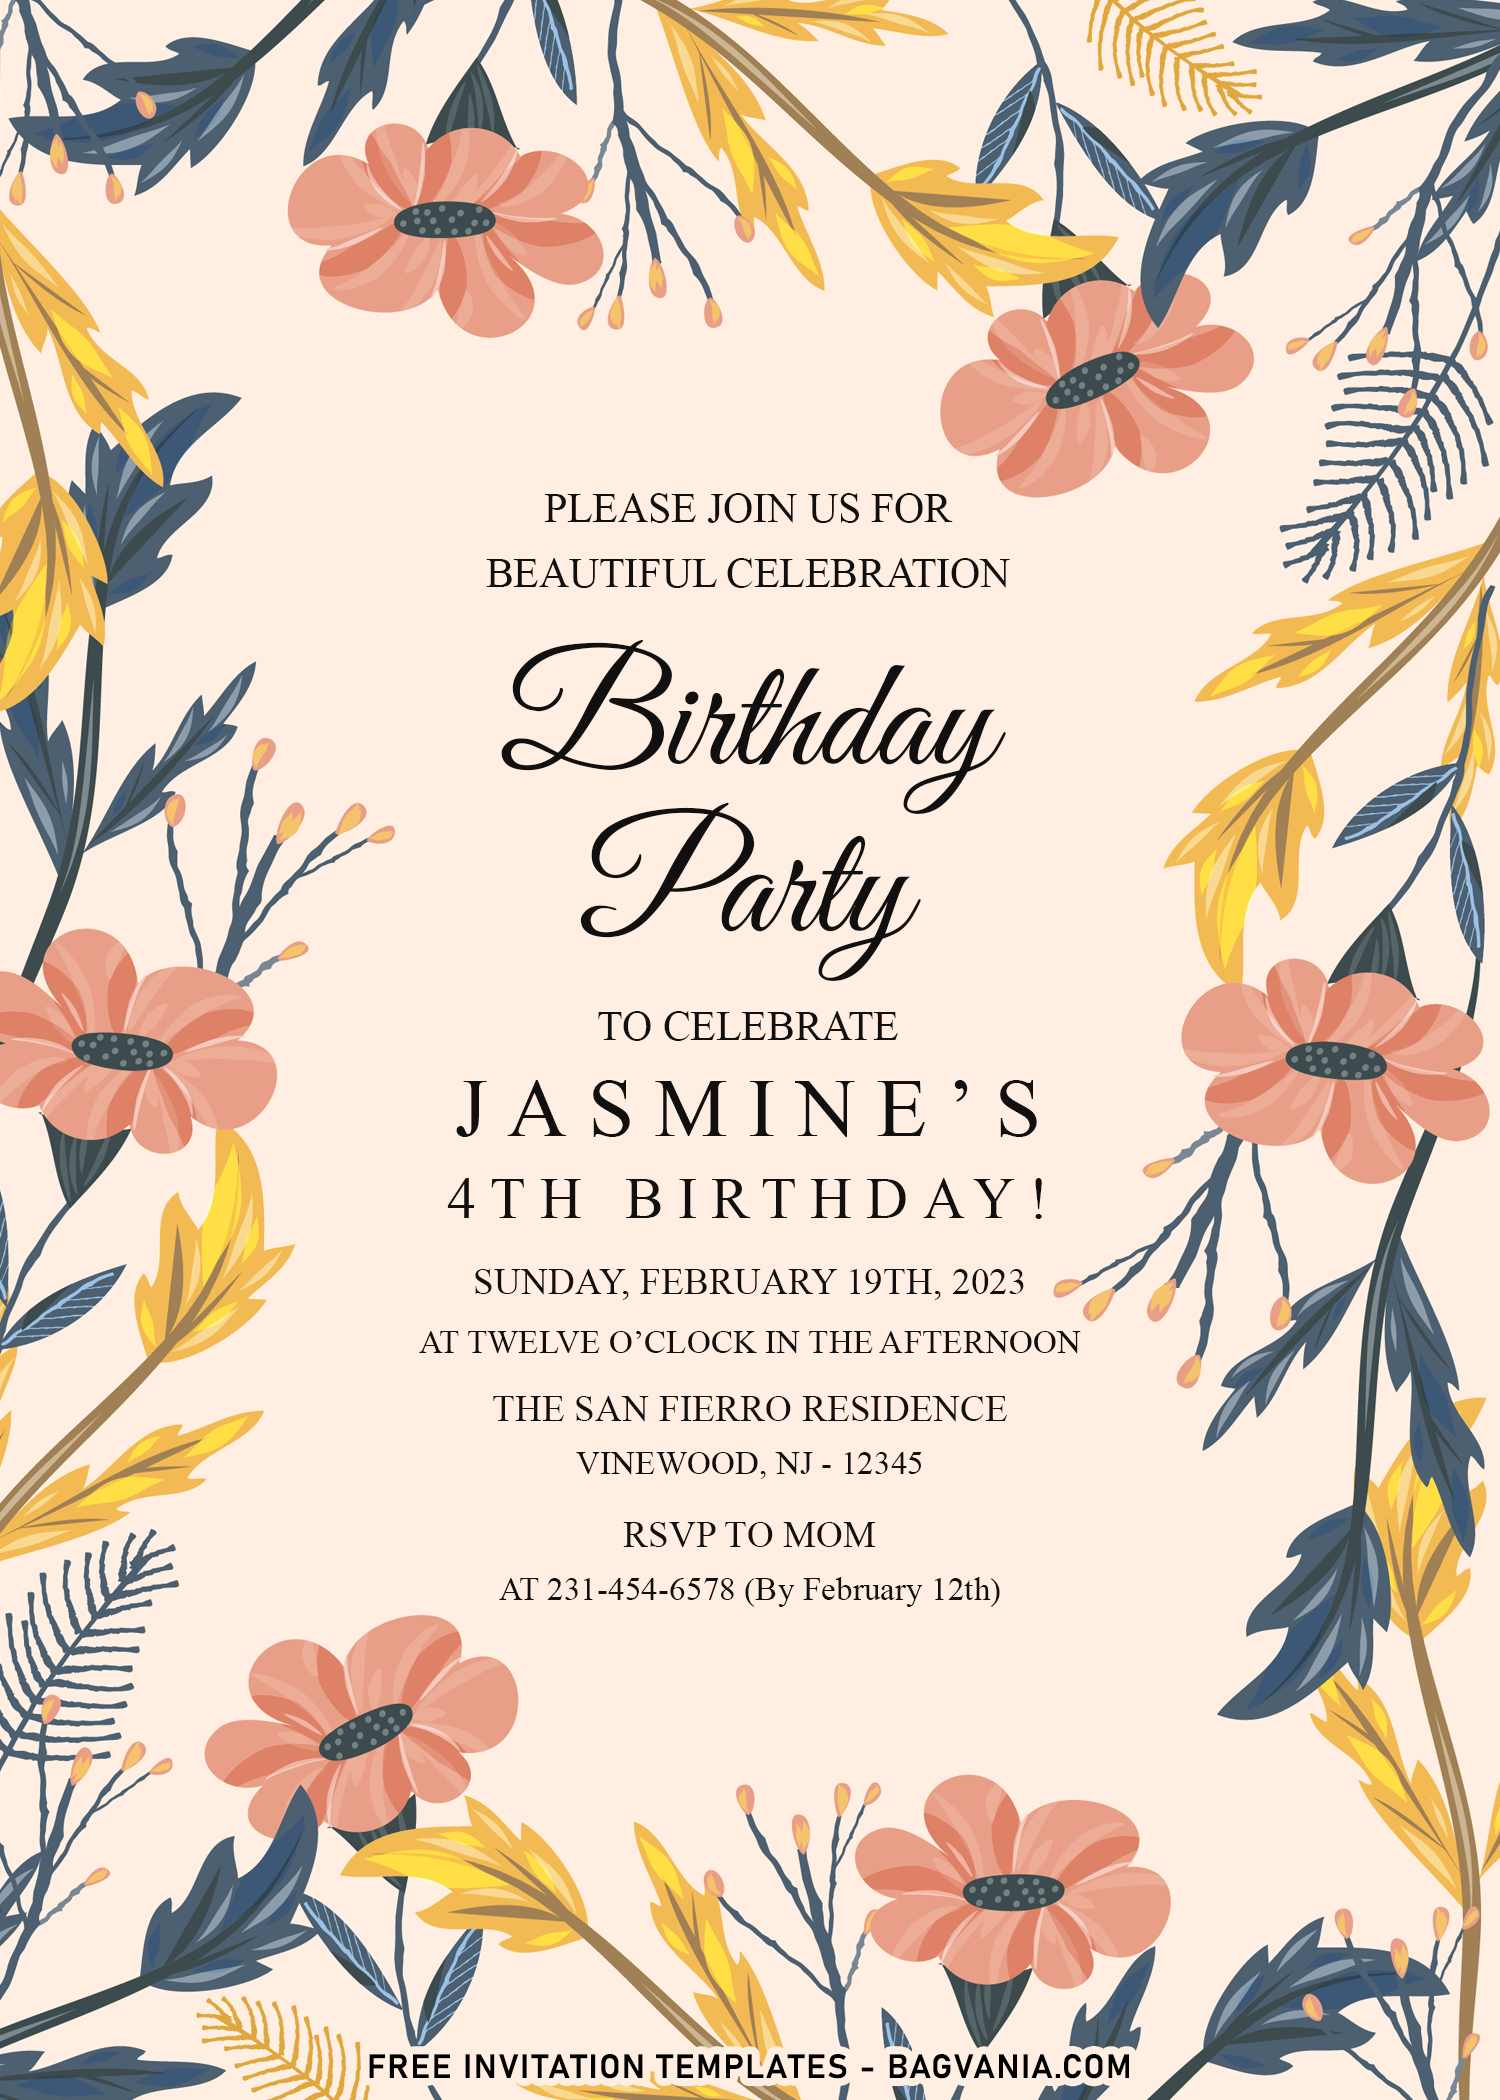 7 Aesthetic Spring Inspired Birthday Invitation Templates For Your 